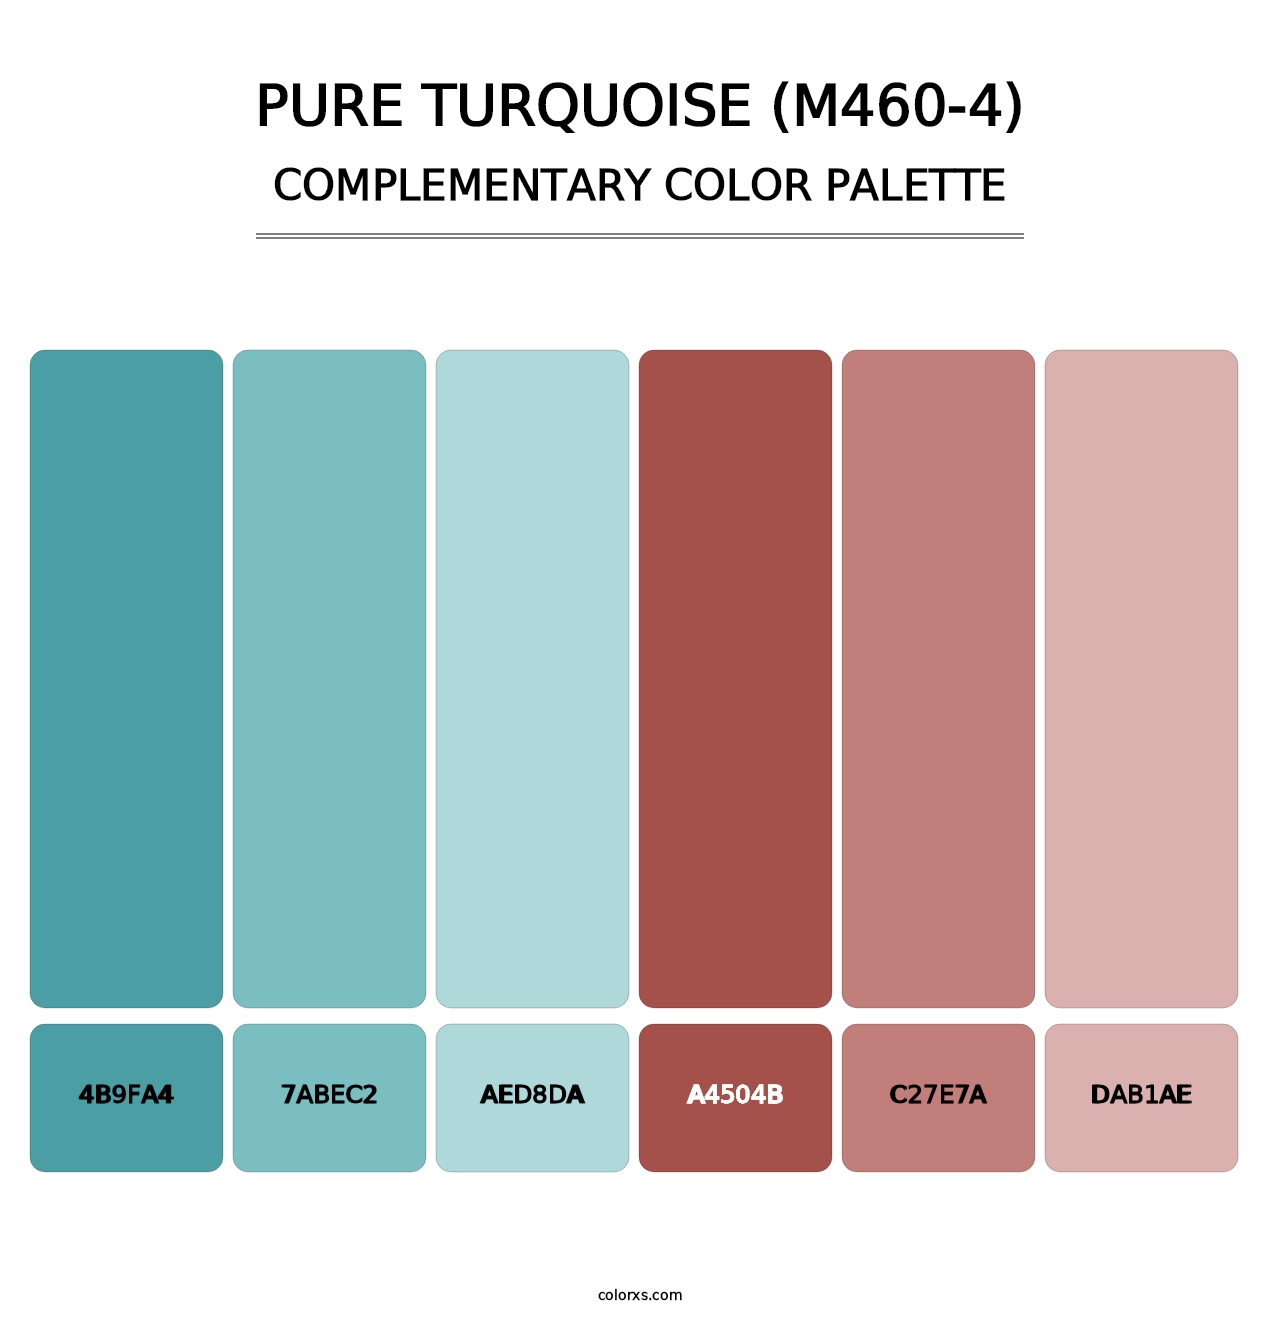 Pure Turquoise (M460-4) - Complementary Color Palette